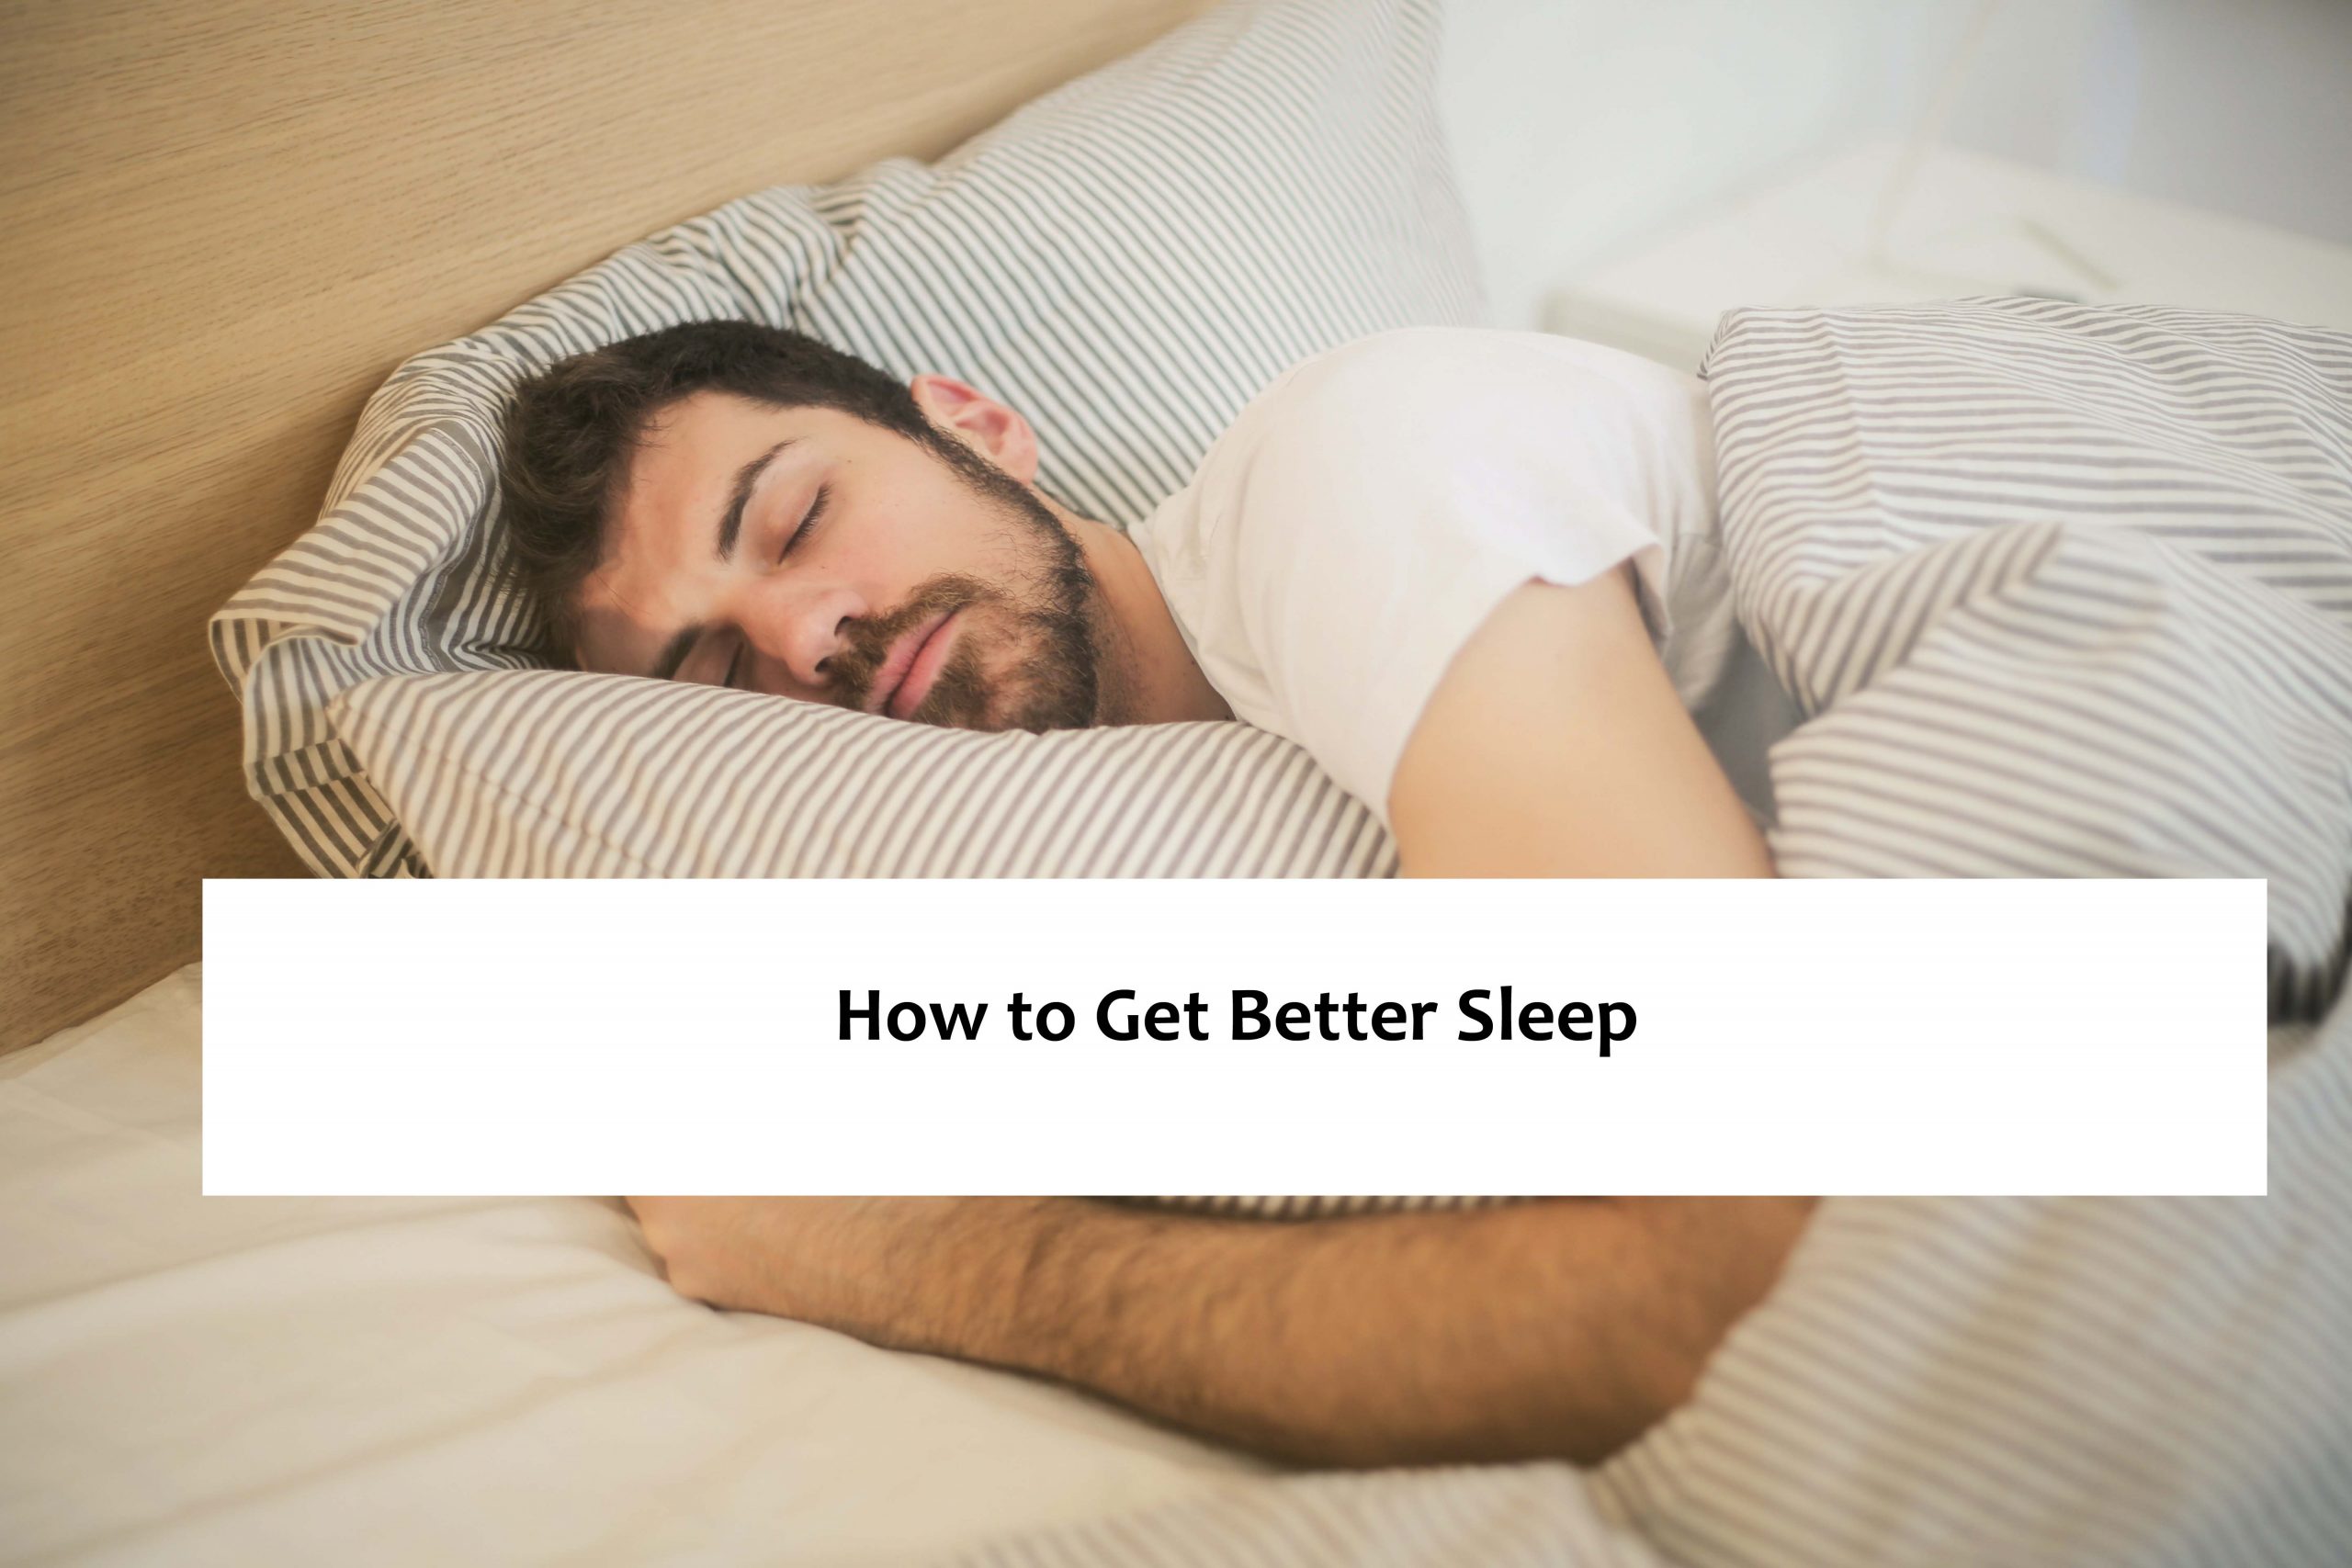 How to Get Better Sleep at night after Night Shift